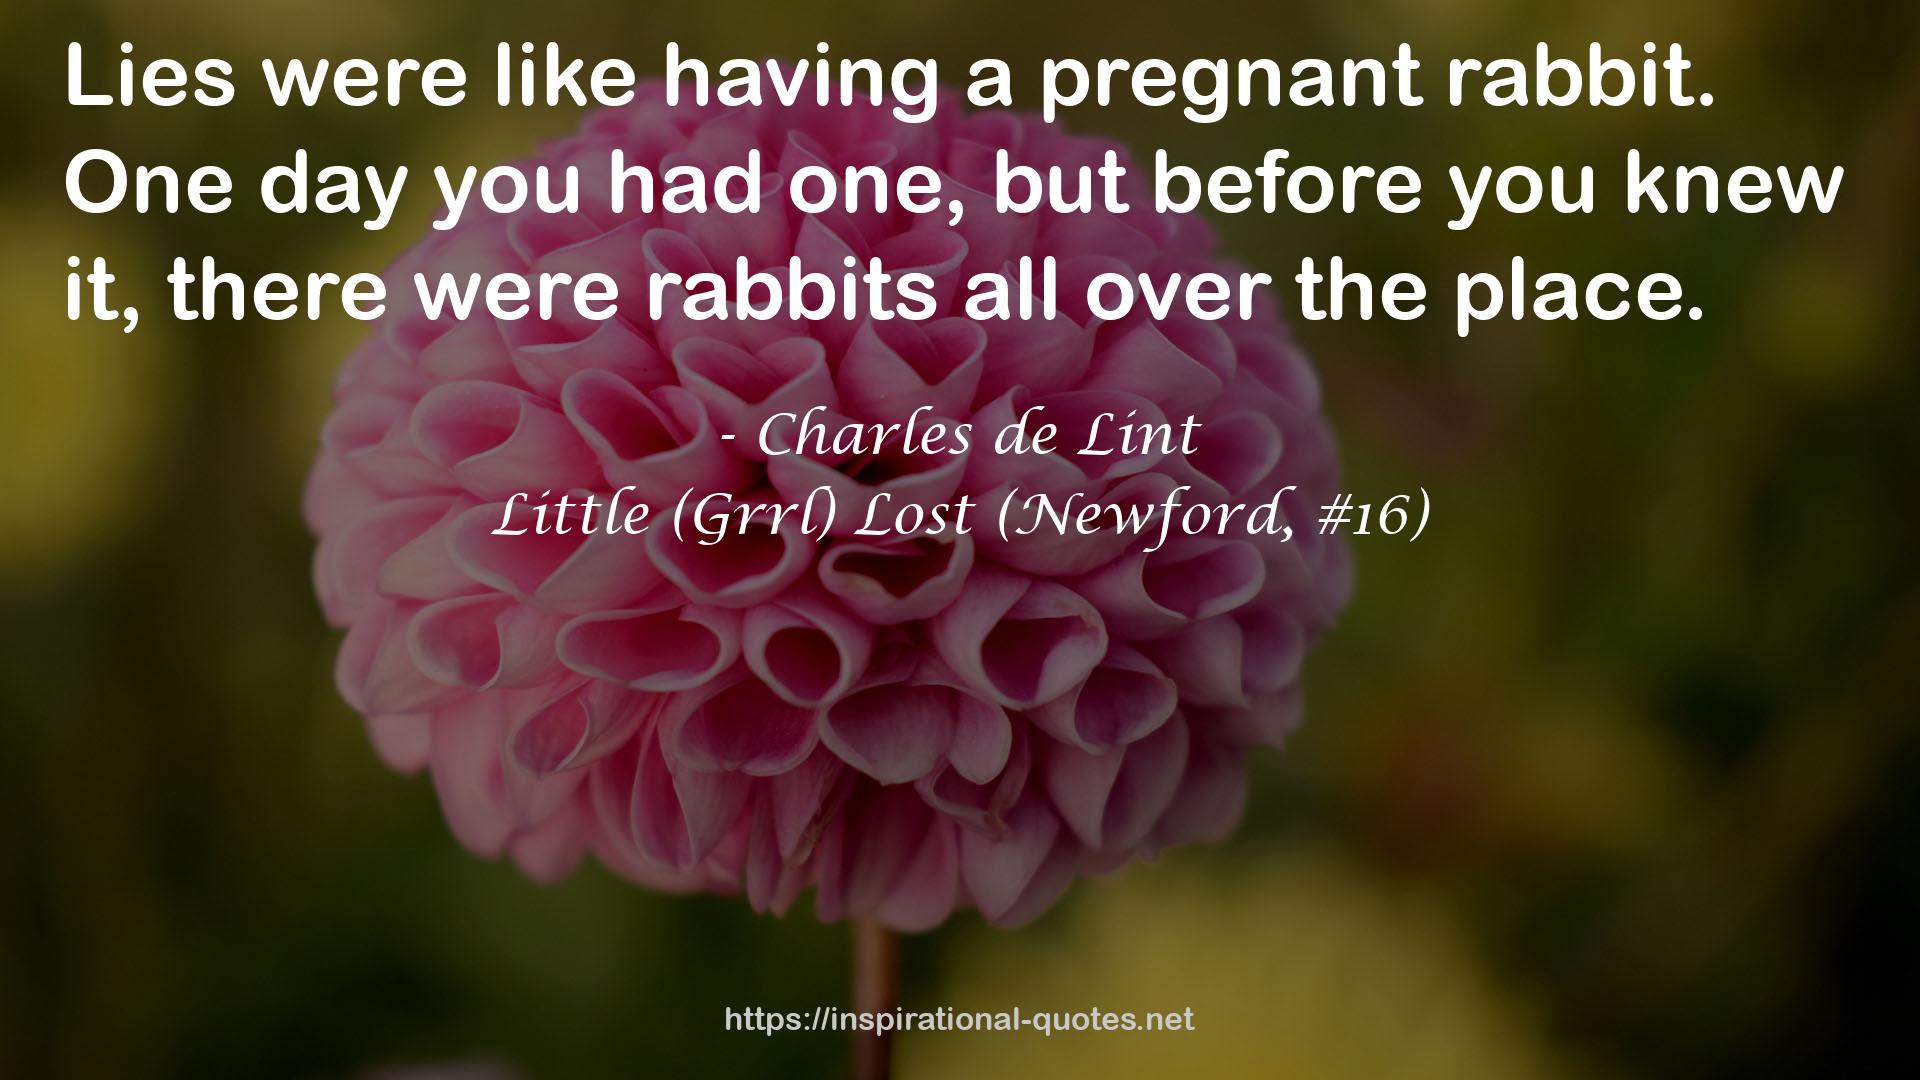 Little (Grrl) Lost (Newford, #16) QUOTES